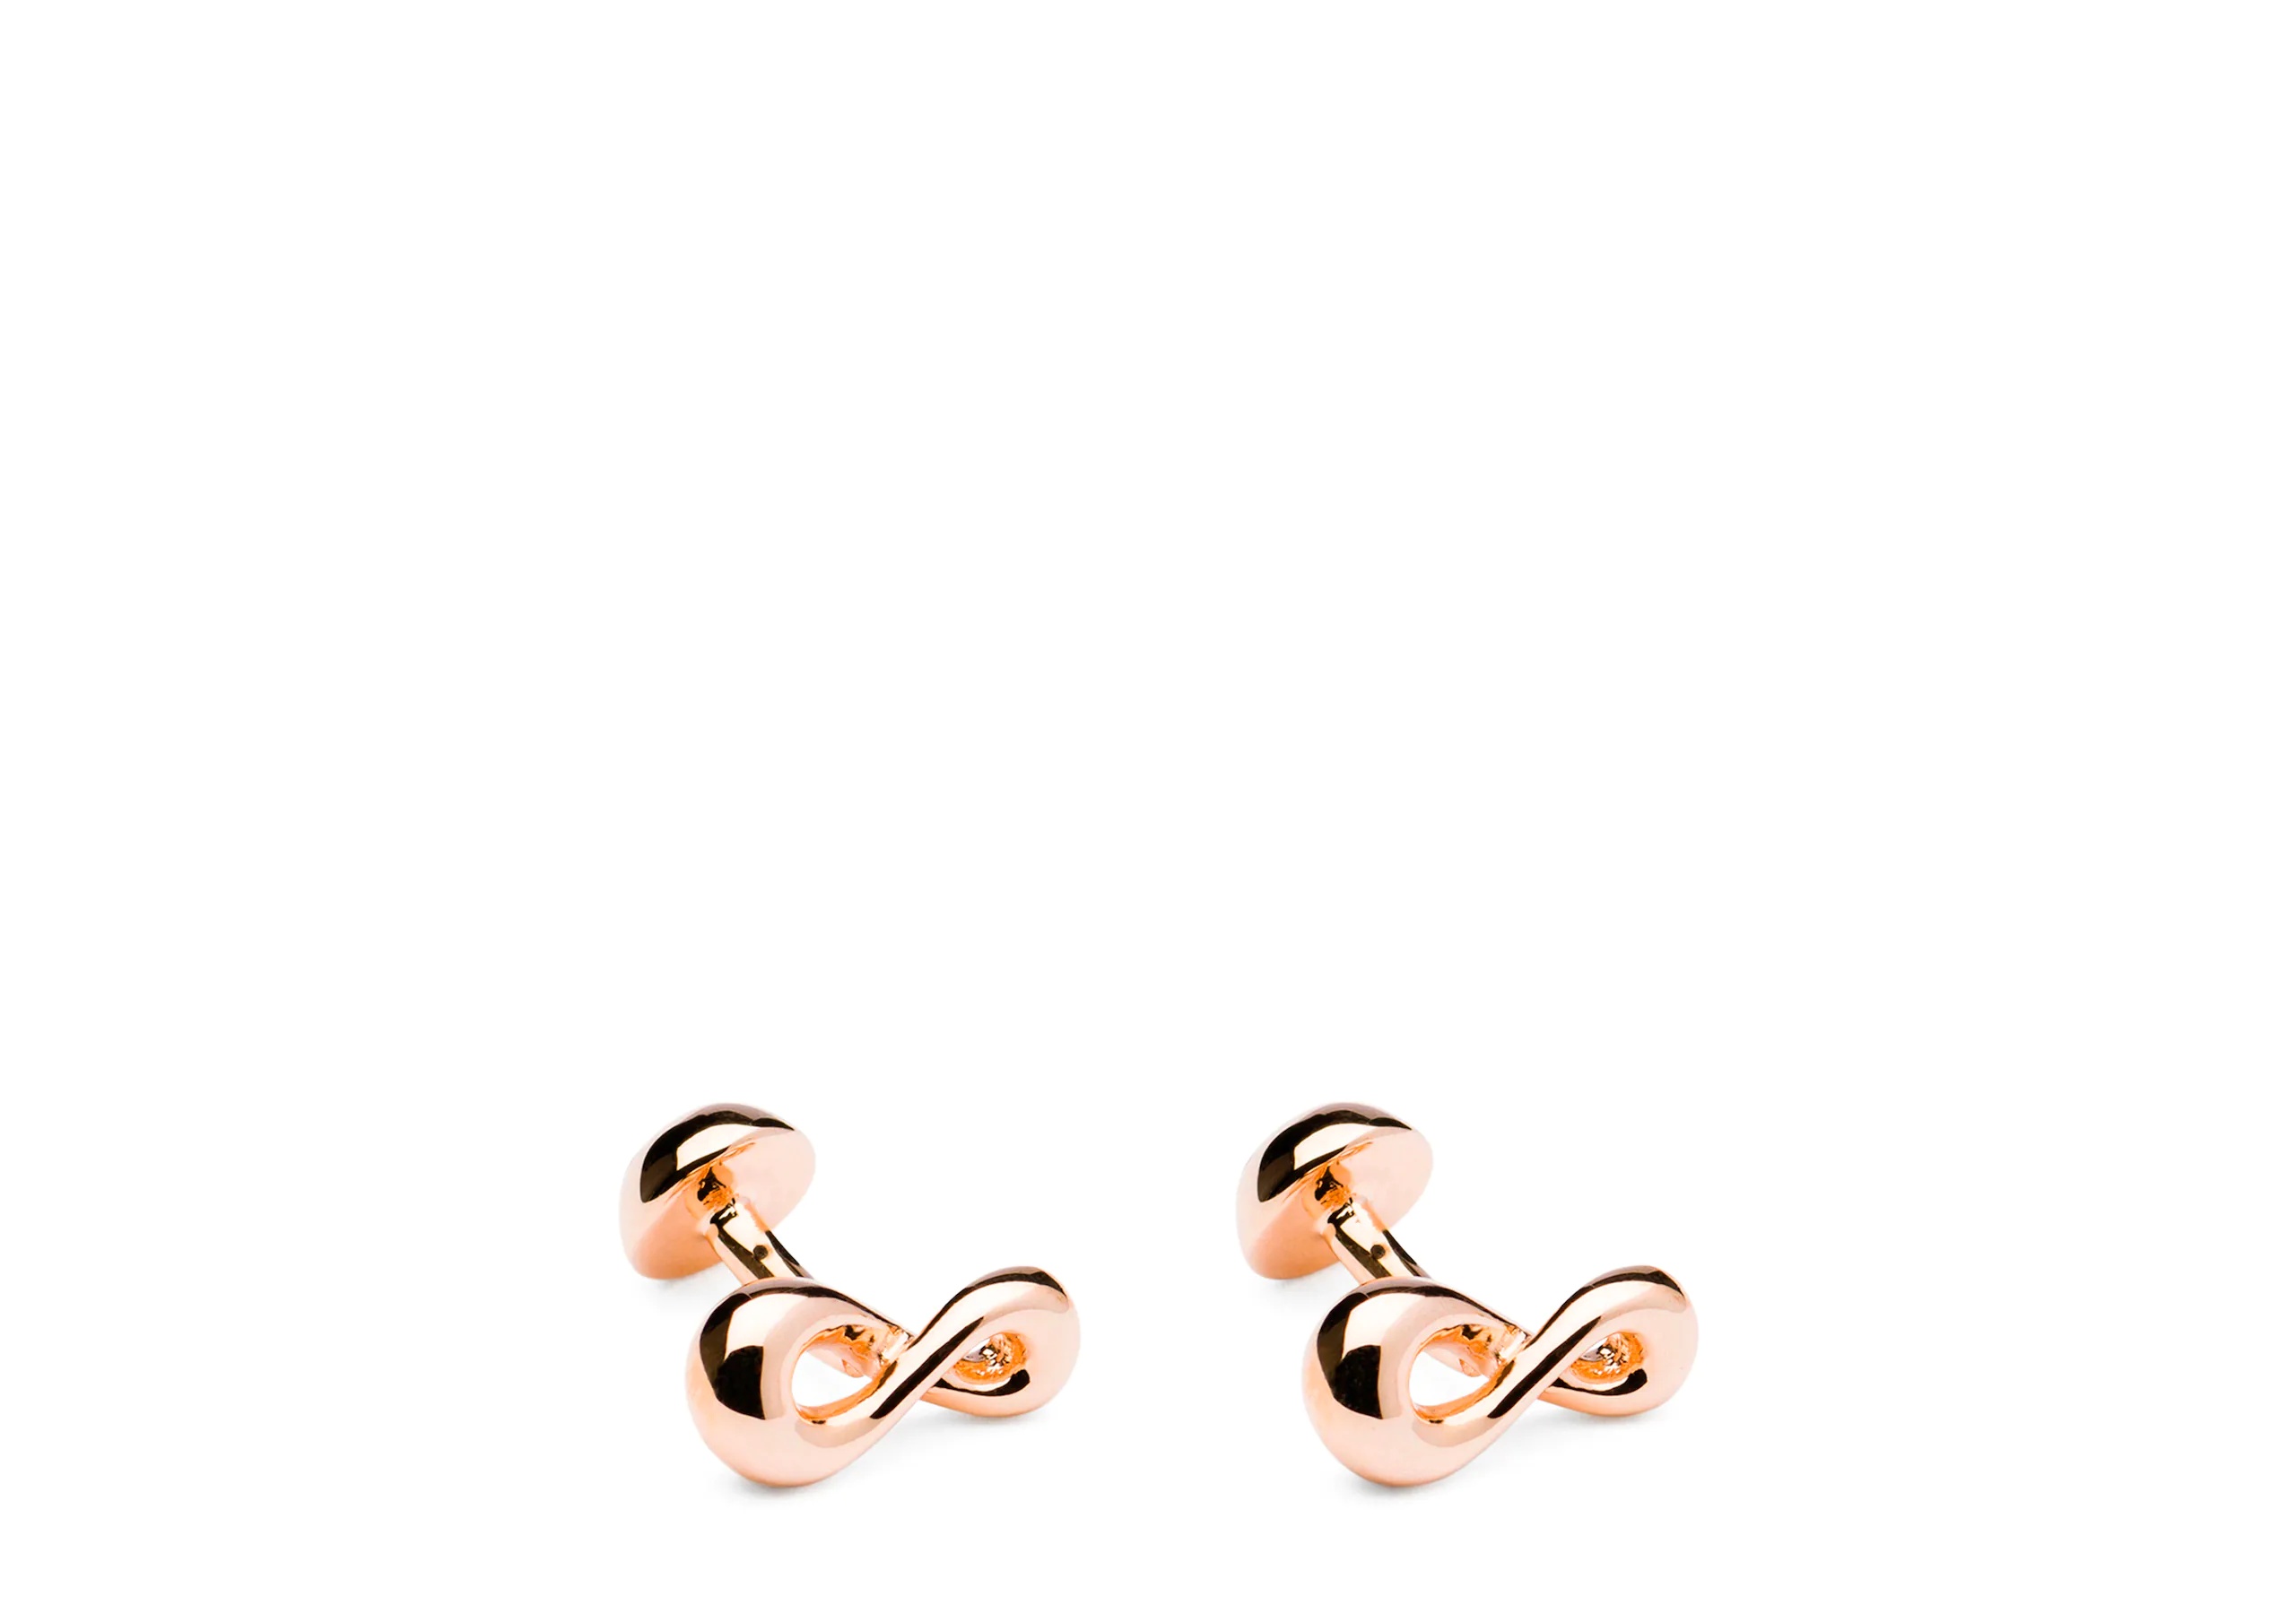 Infinity cufflink
Rose Gold Plated Infinity Knot Rose gold - 1